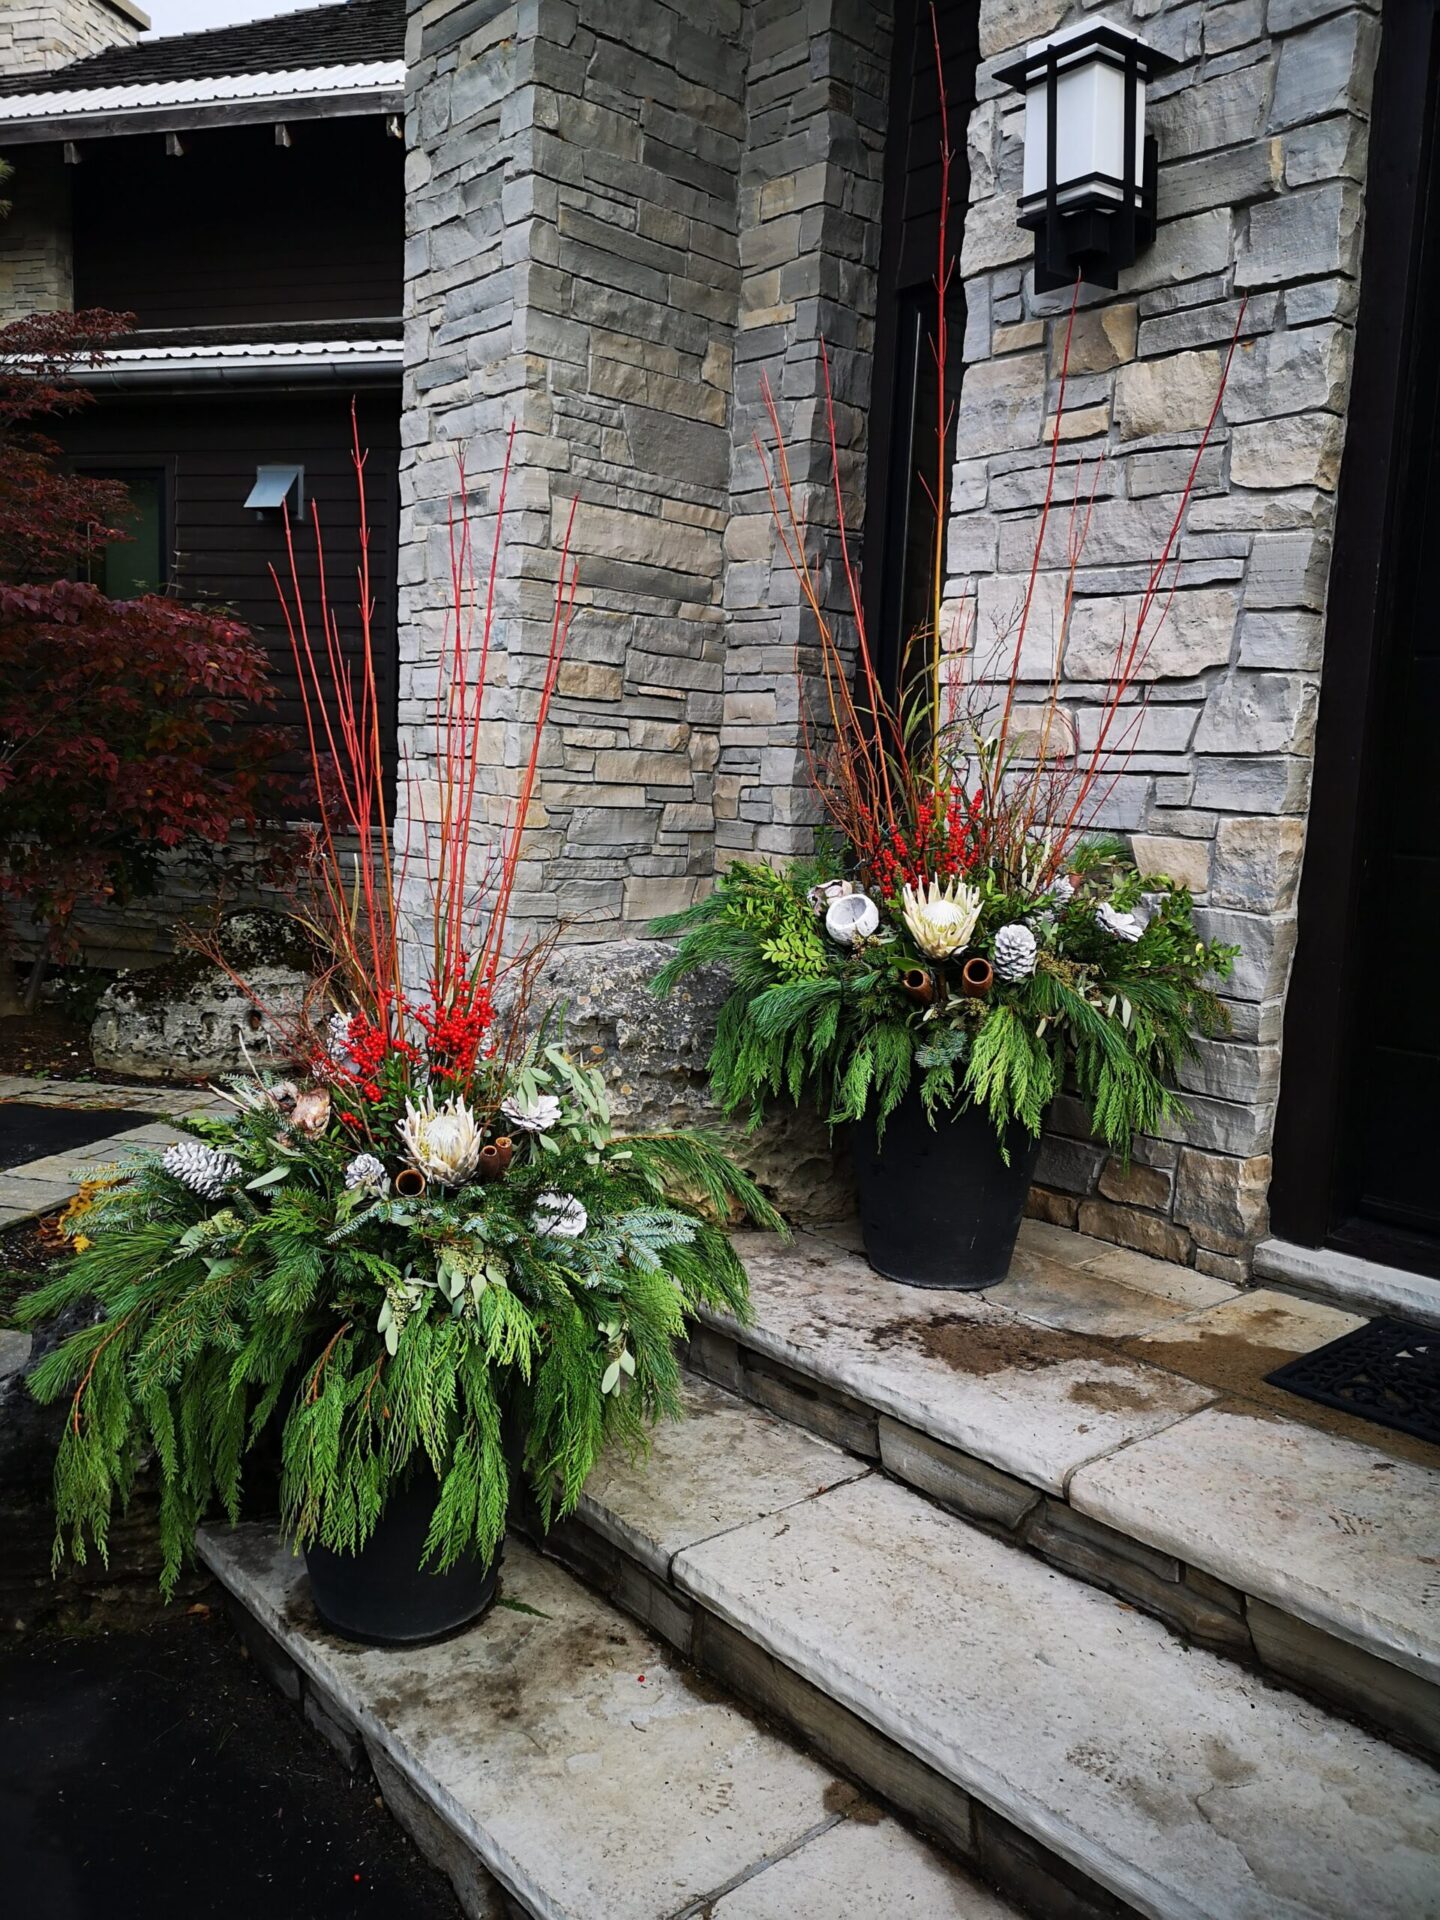 Two large floral arrangements in black pots stand on a stone stairway leading to a house with gray stone walls and a dark door.